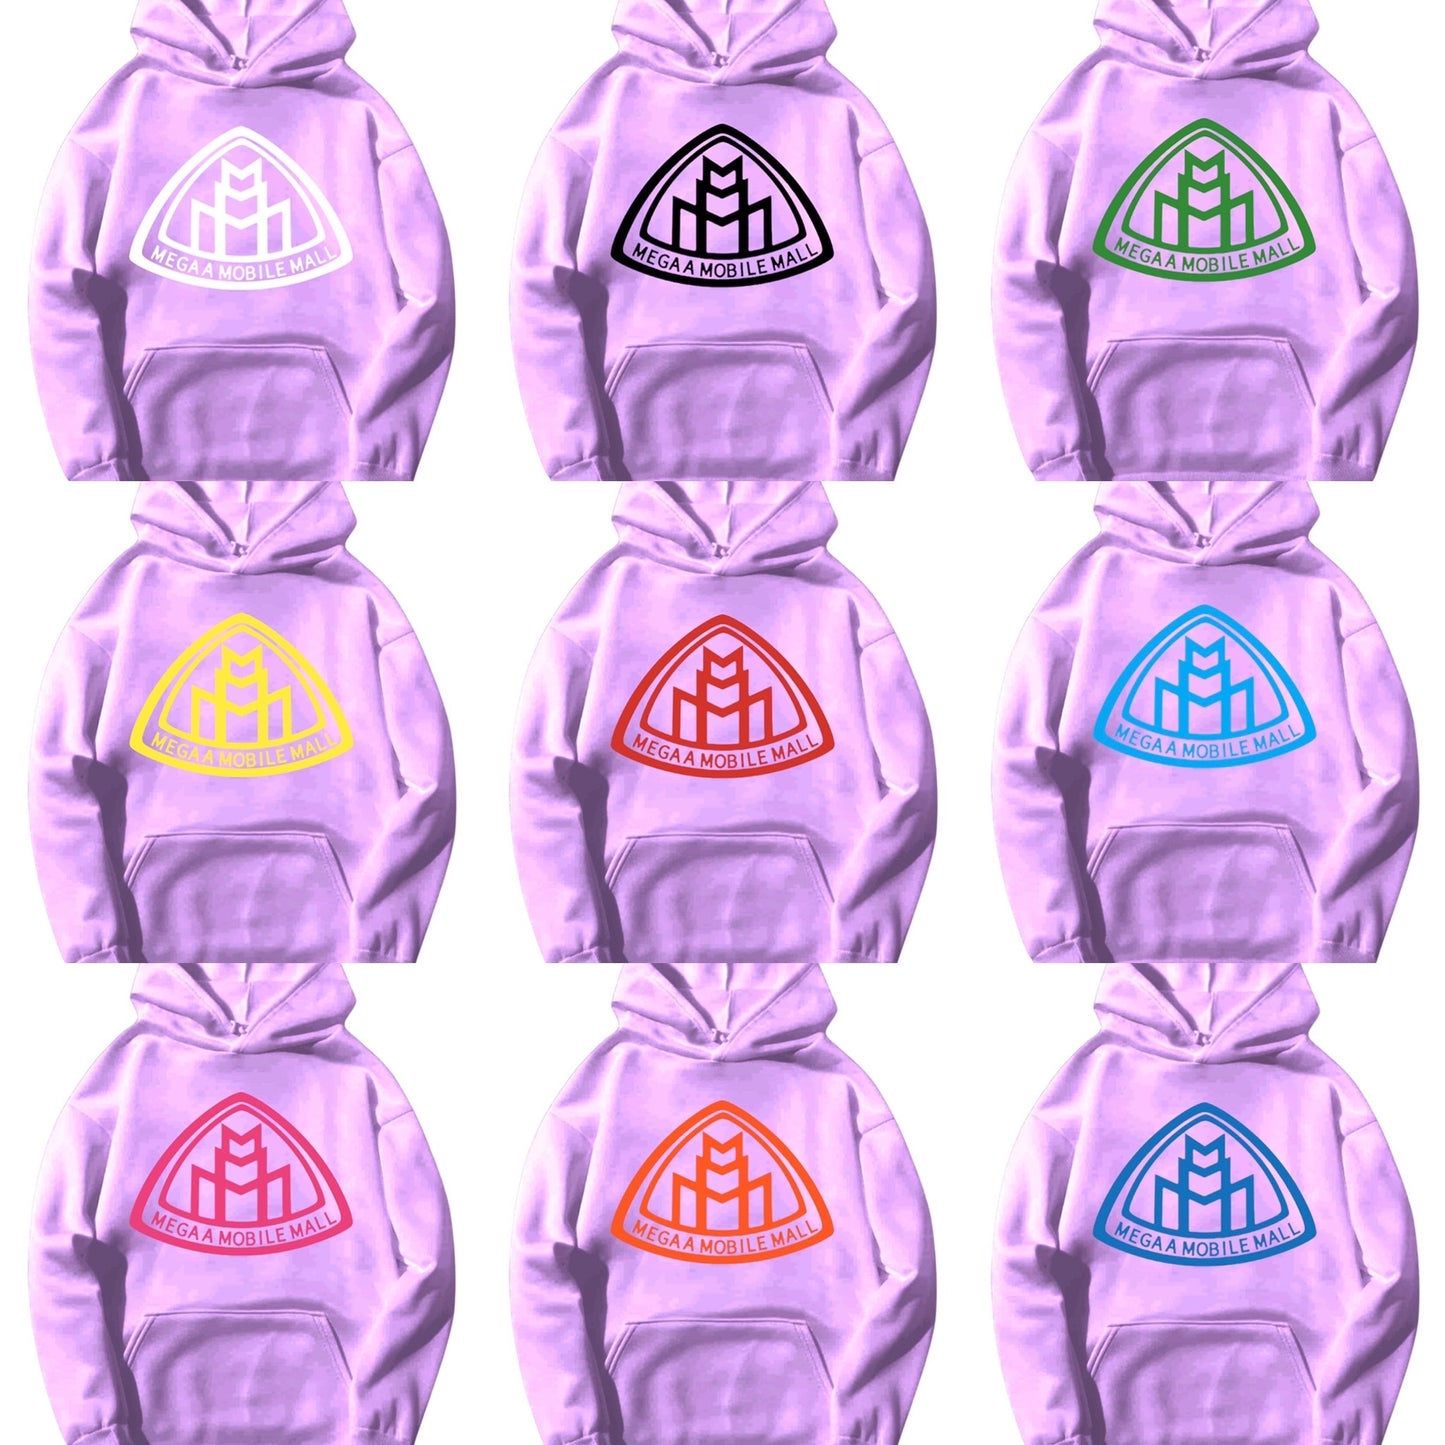 lilac megaamobilemall logo Heavy Blend Fleece Hoodie with 9 different logo color options